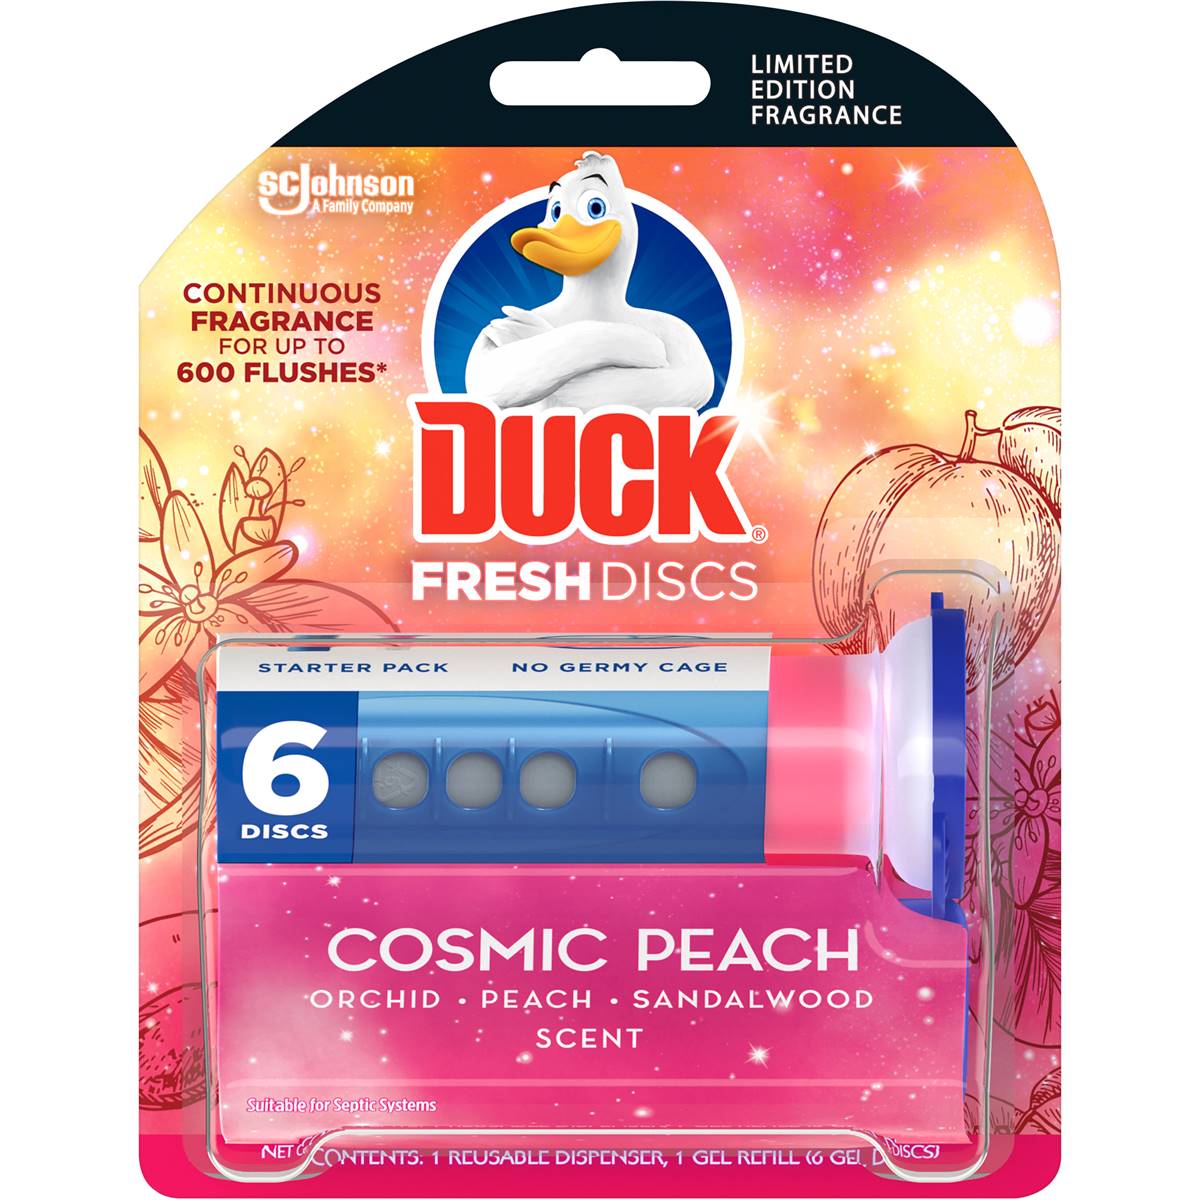 Duck Fresh Discs Toilet Cleaner Limited Edition 36ml – Good Groceries